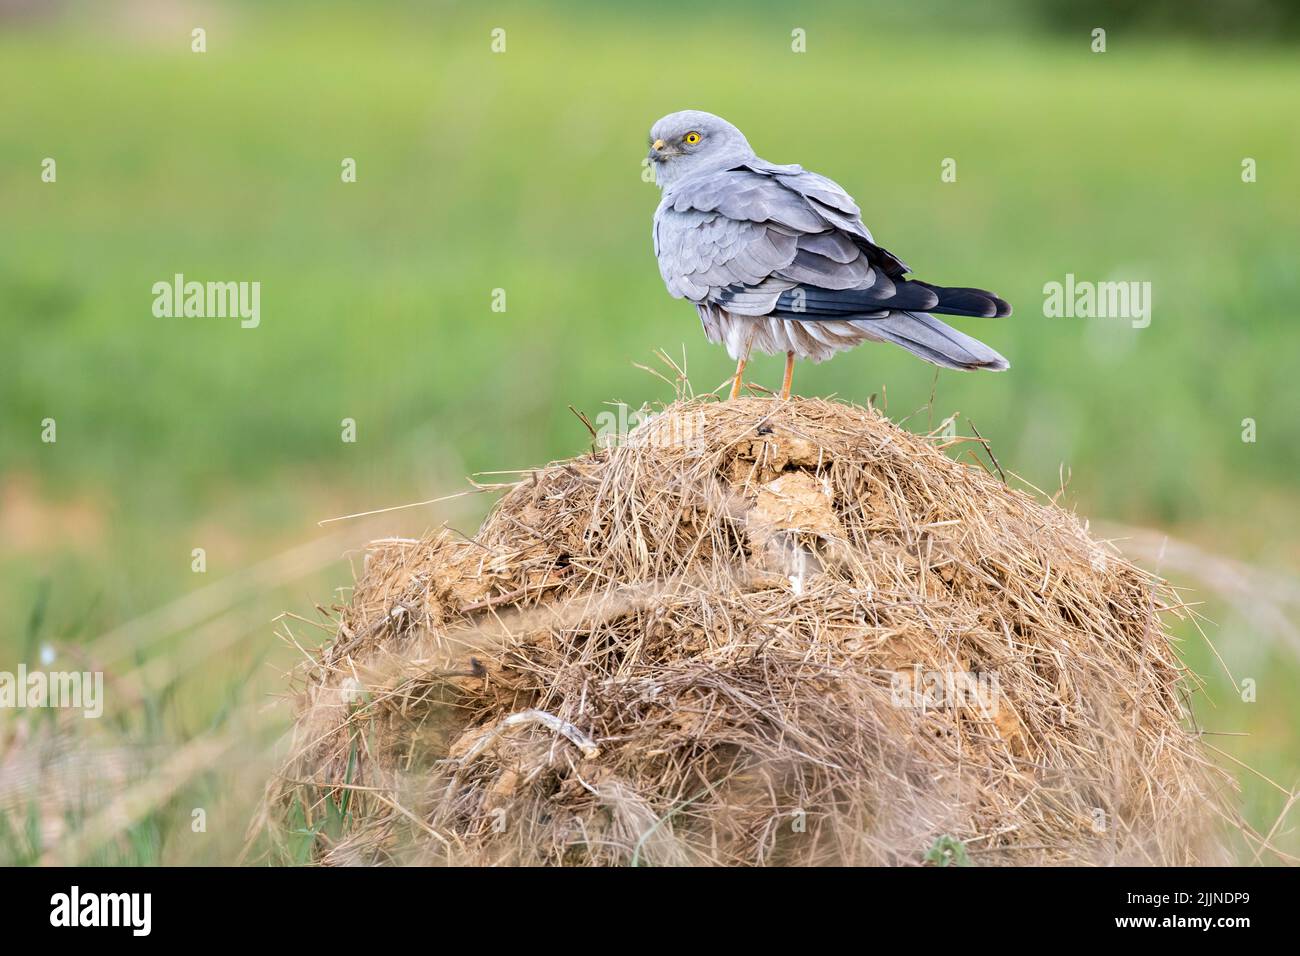 Montagu's harrier, Circus pygargus, perched on a straw bale on an even green background. Spain Stock Photo